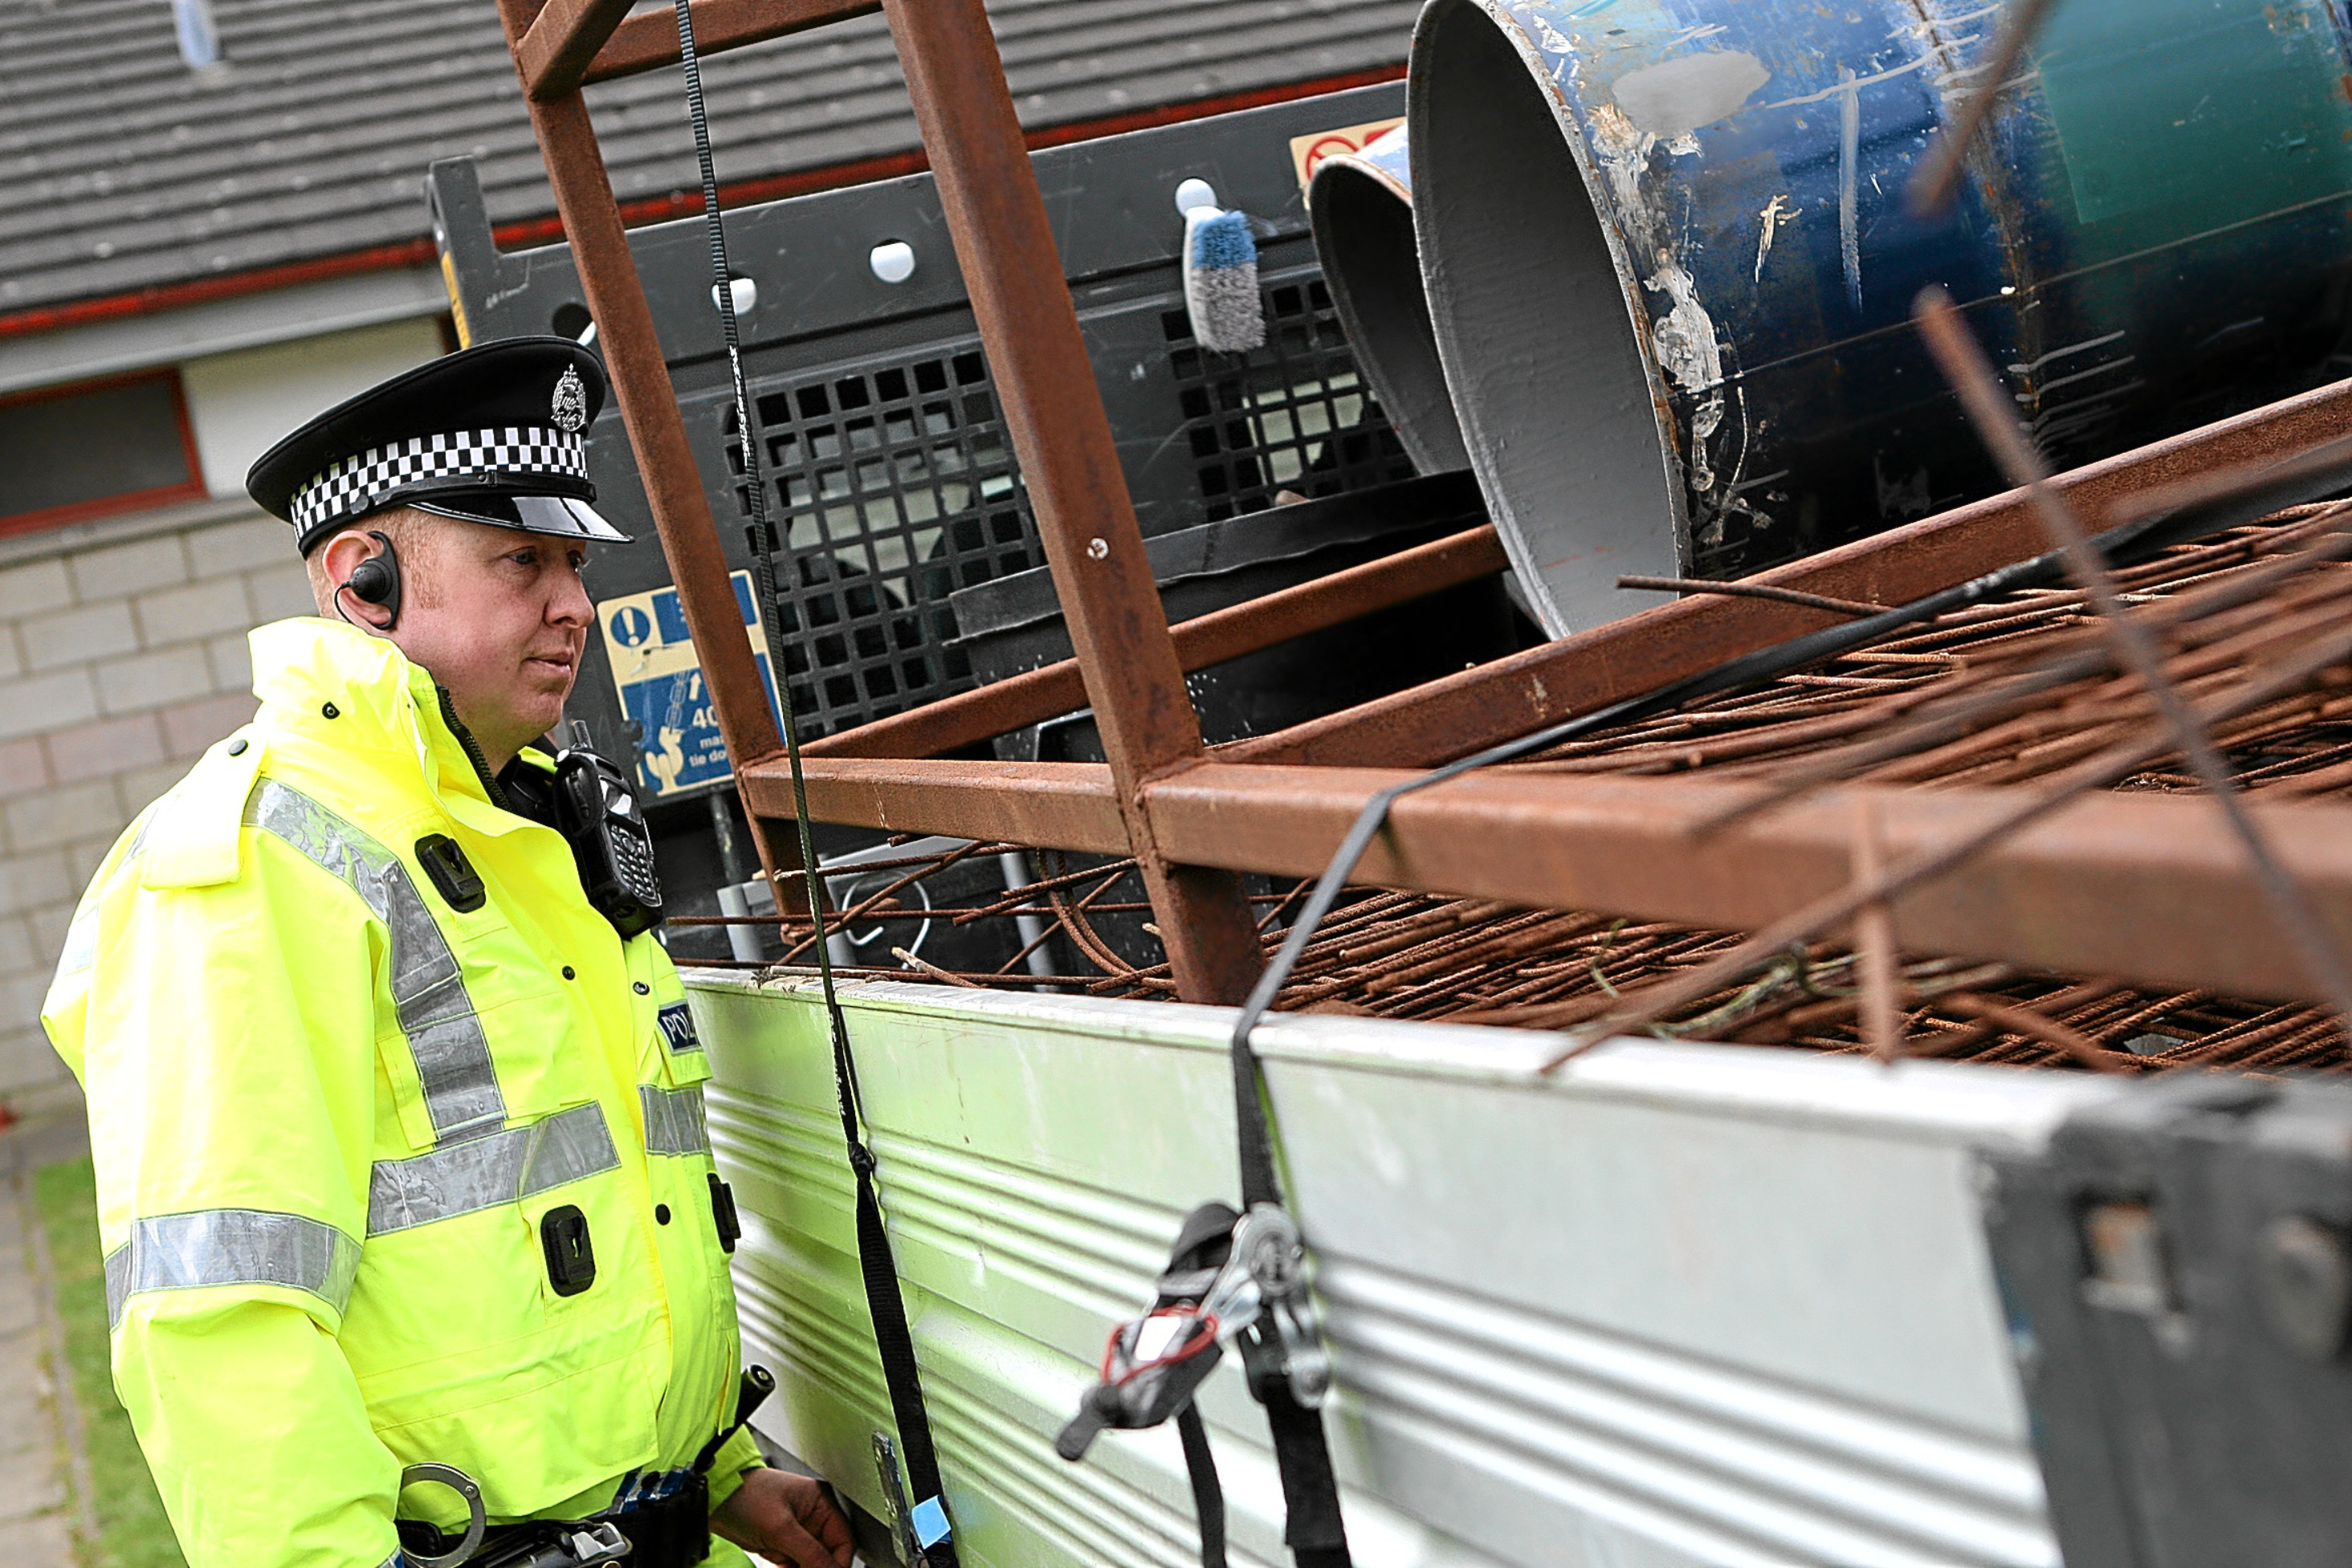 Police are clamping down on illegal scrap metal dealing.